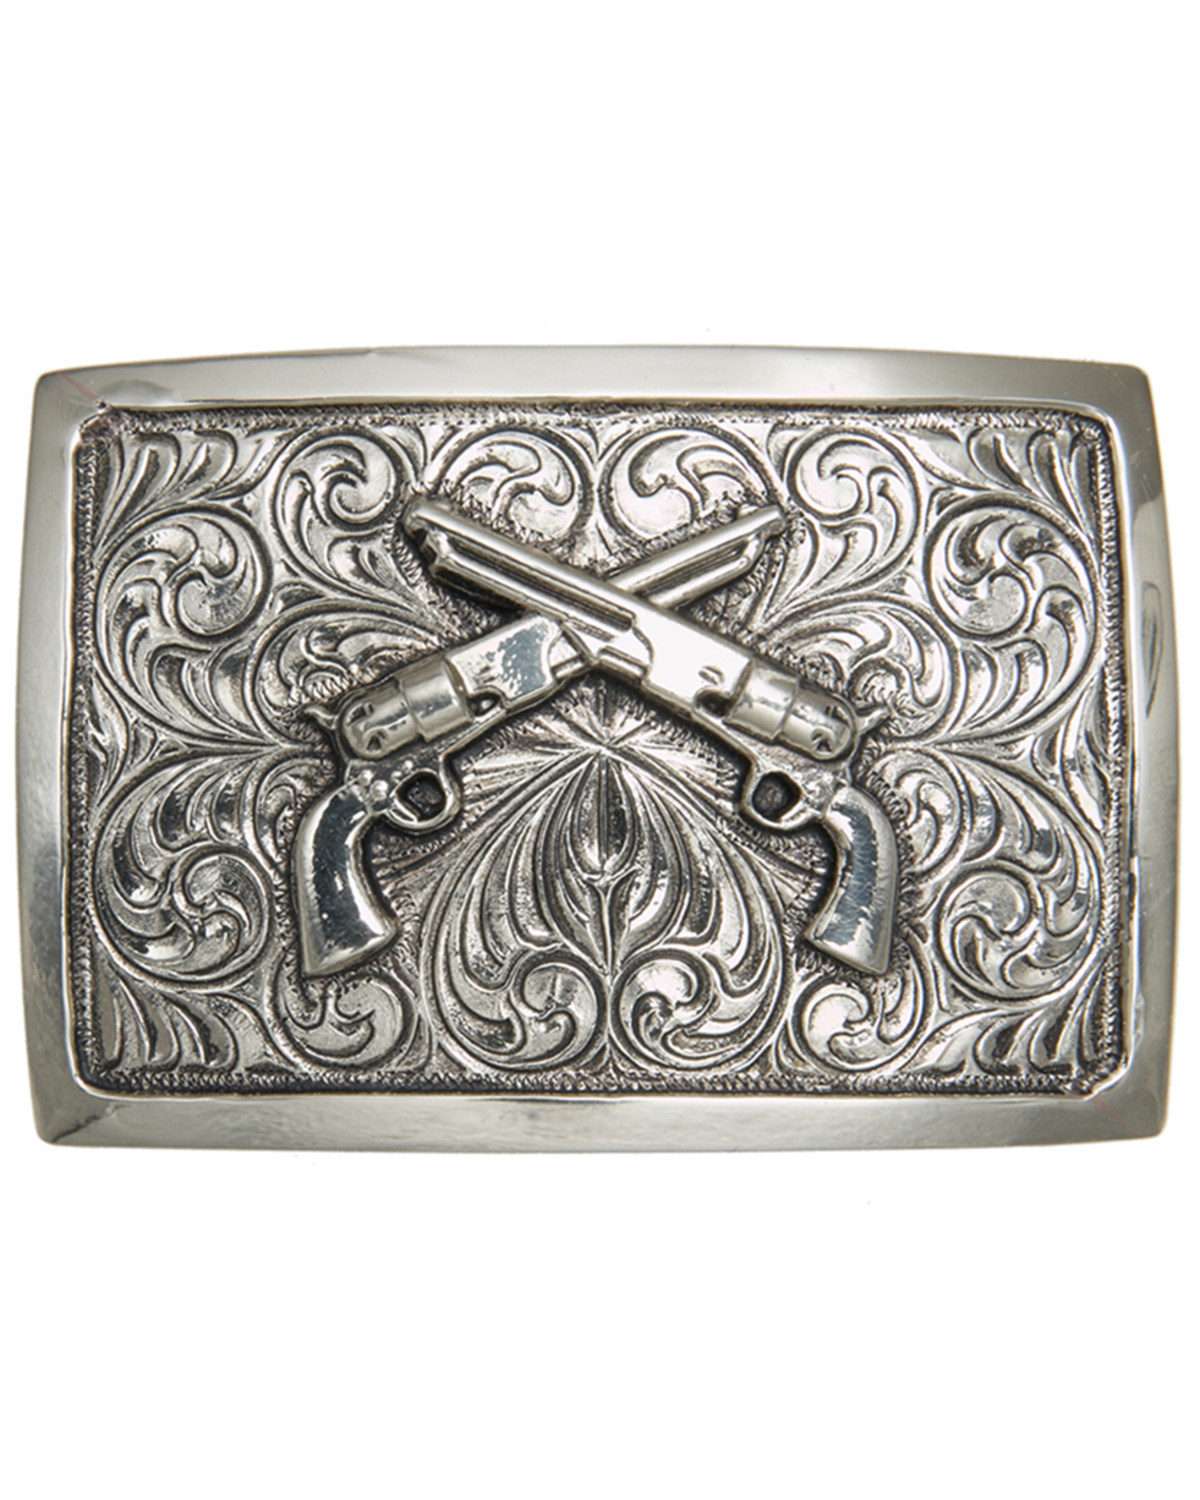 AndWest Antique Silver Crossed Pistols Iconic Buckle